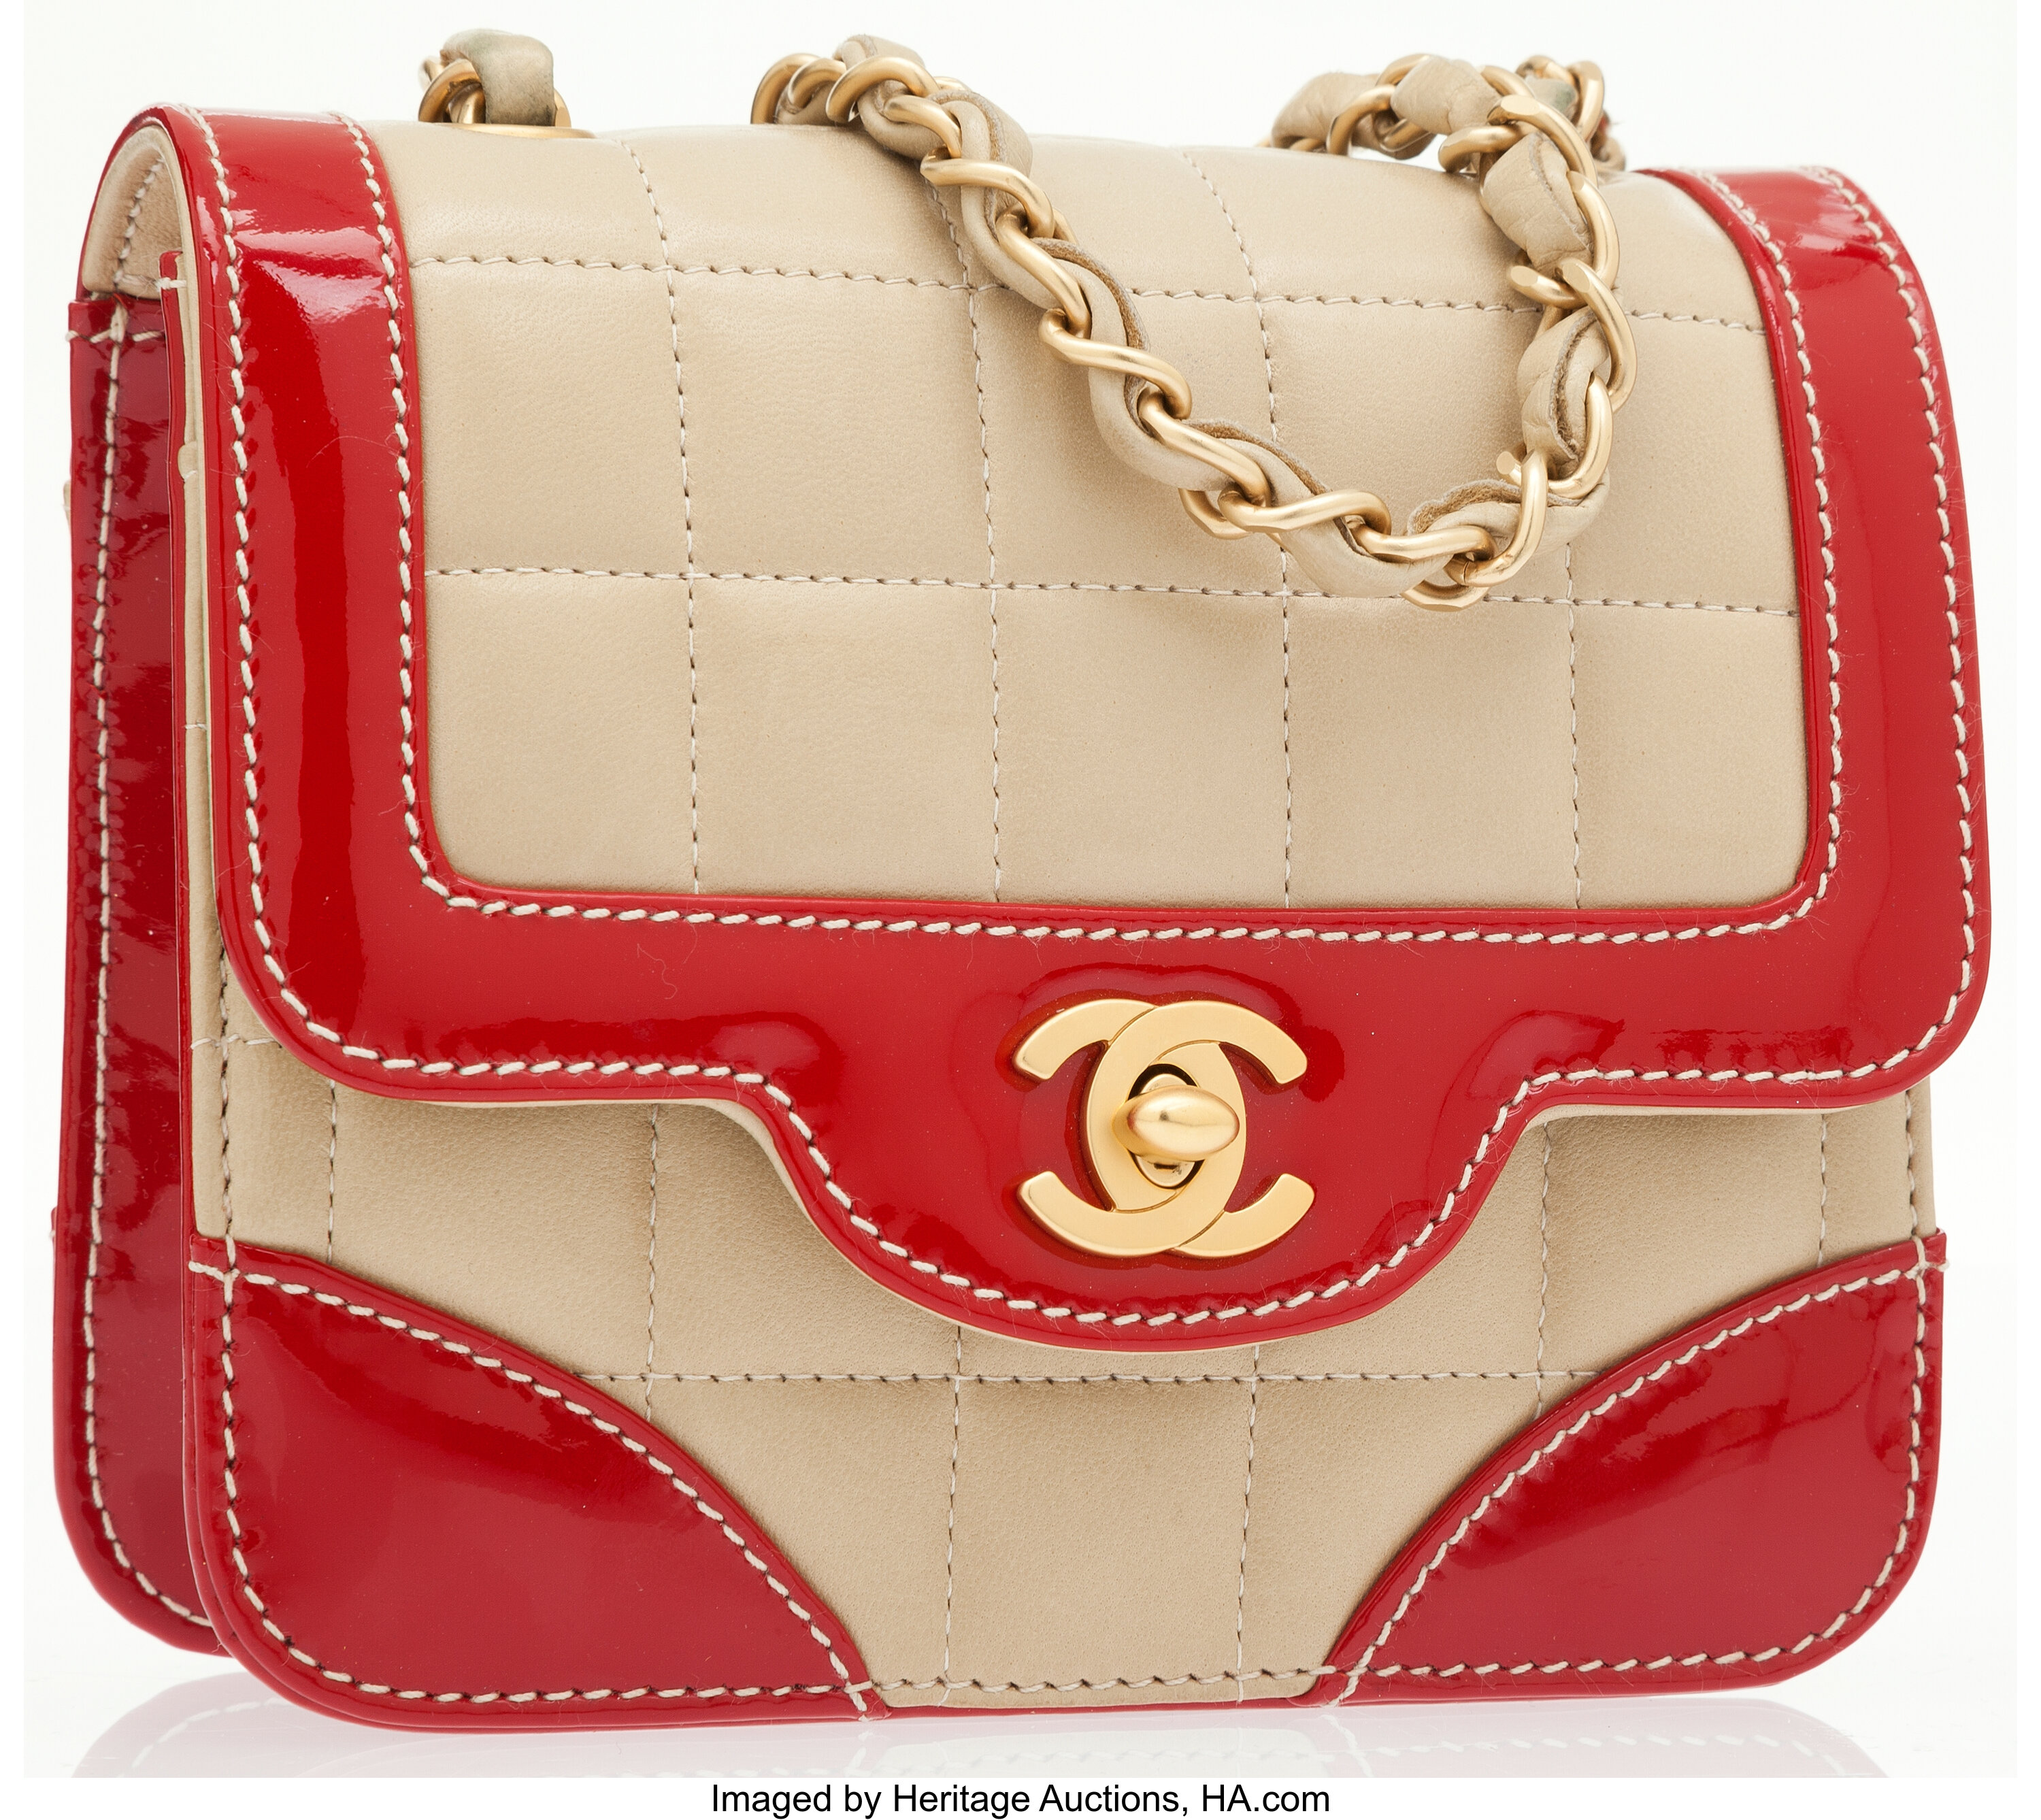 Sold at Auction: Chanel Red Square Quilted East West Chocolate Bar Bag